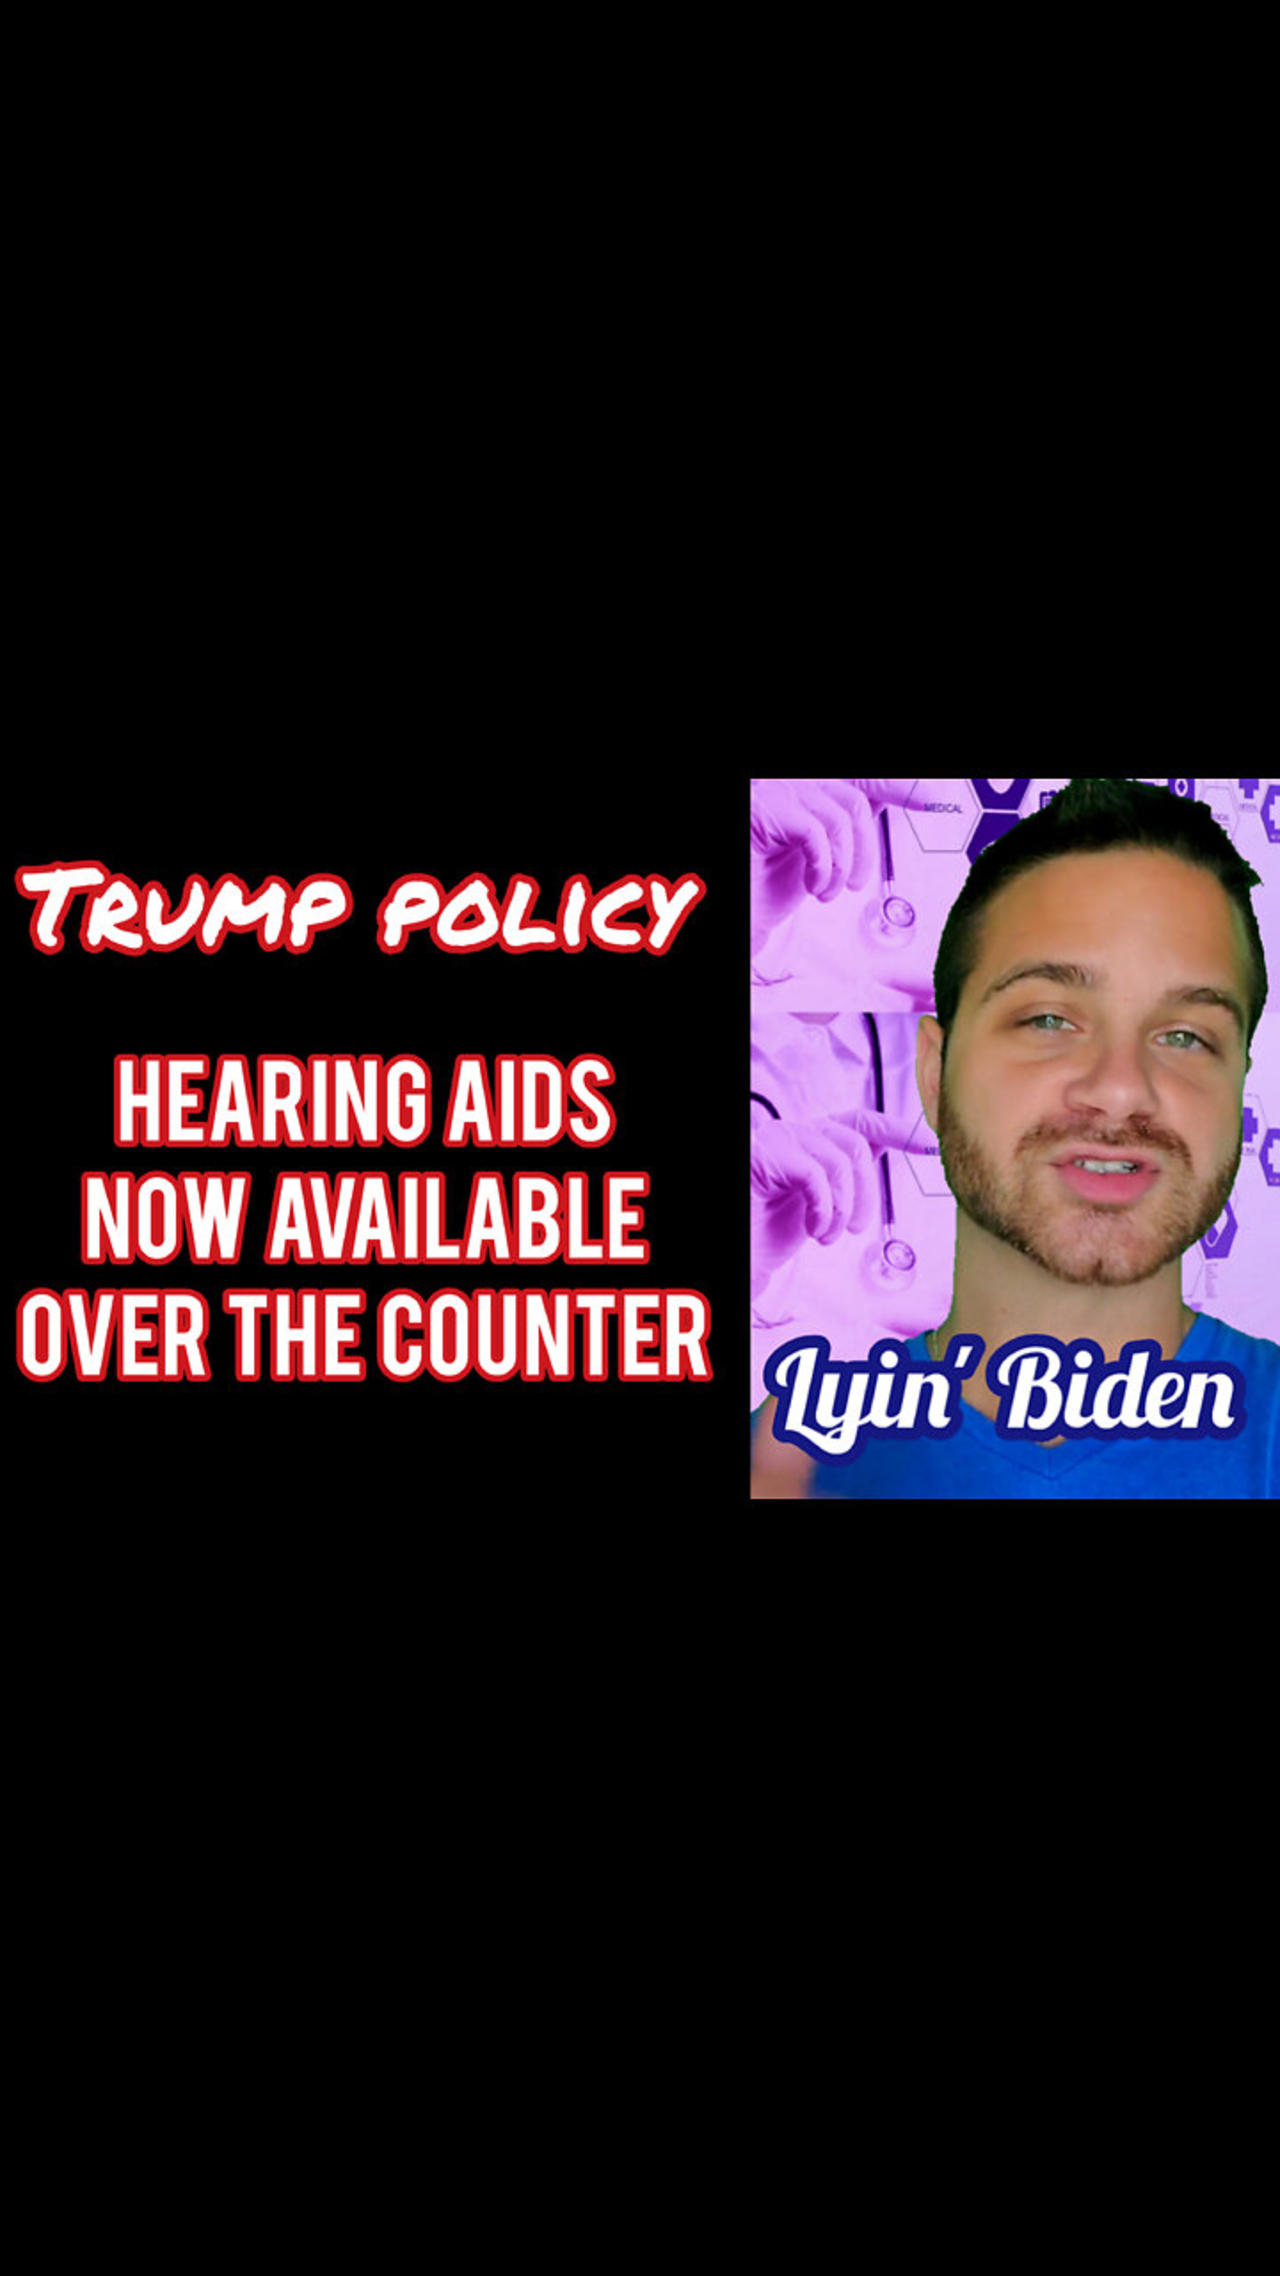 Trump Policy Enables Hearing Aids Over The Counter, Biden Lies And Takes Credit